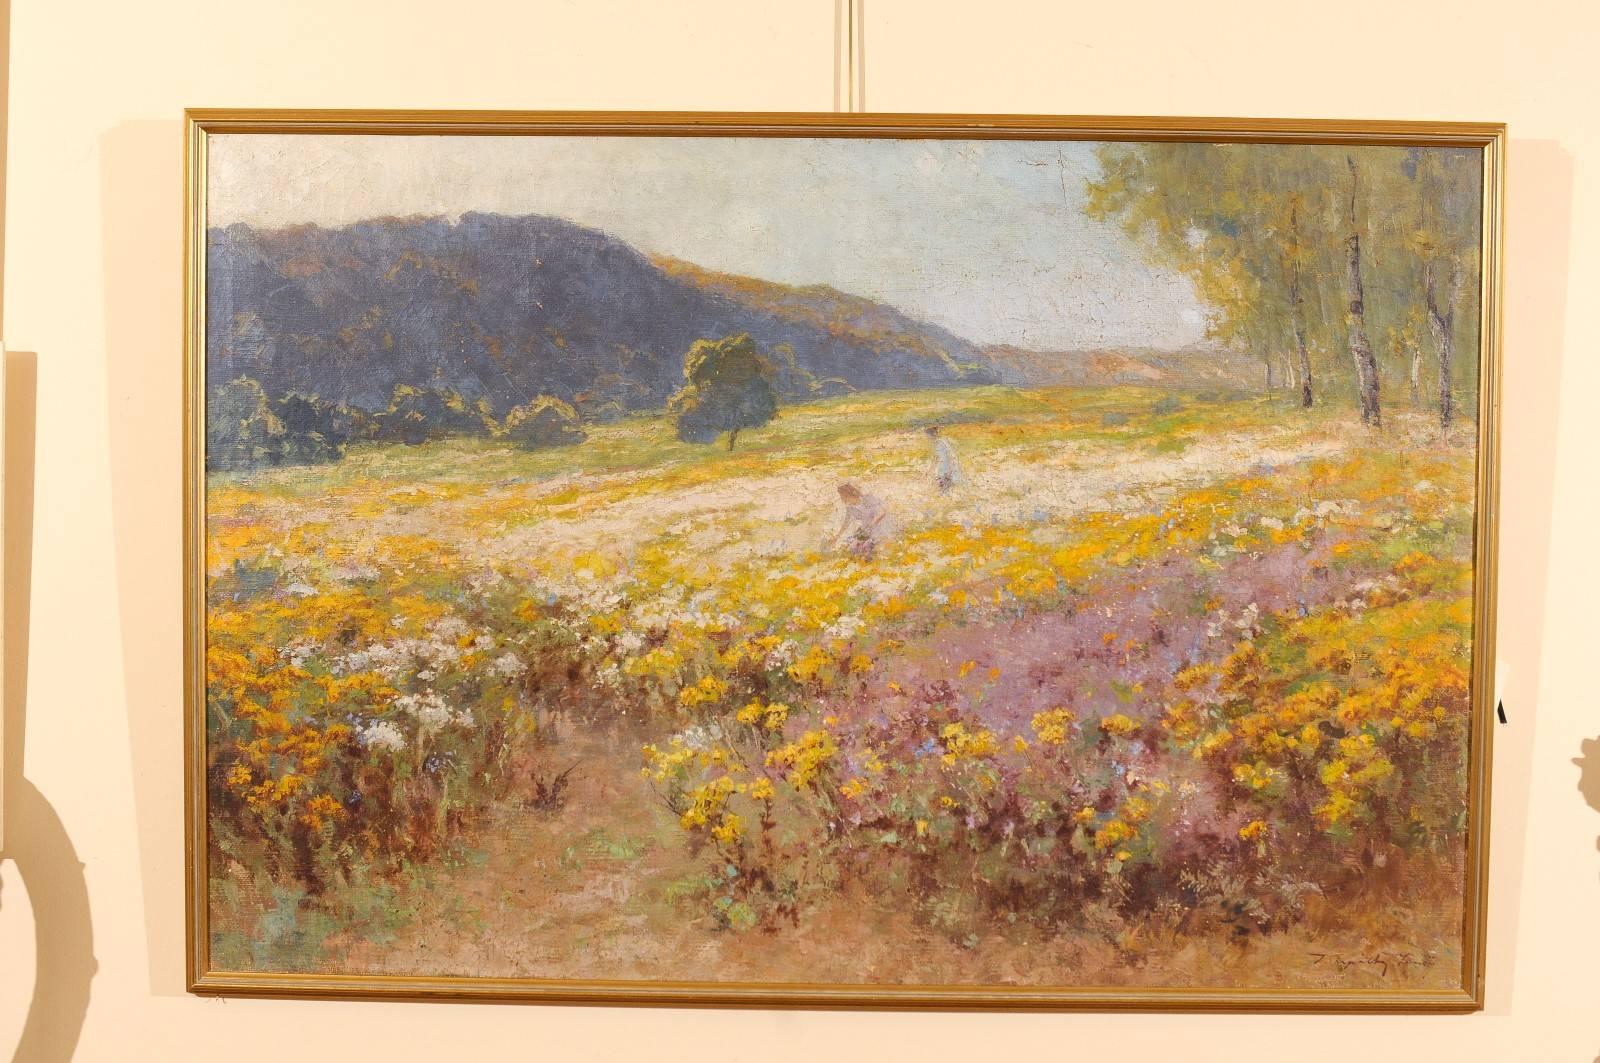 Large Impressionist style oil on canvas landscape painting depicting women picking flowers in field. Flowers in hues of violet, lavender, goldenrod and white. Signed lower right, not legible. Gilt frame later.